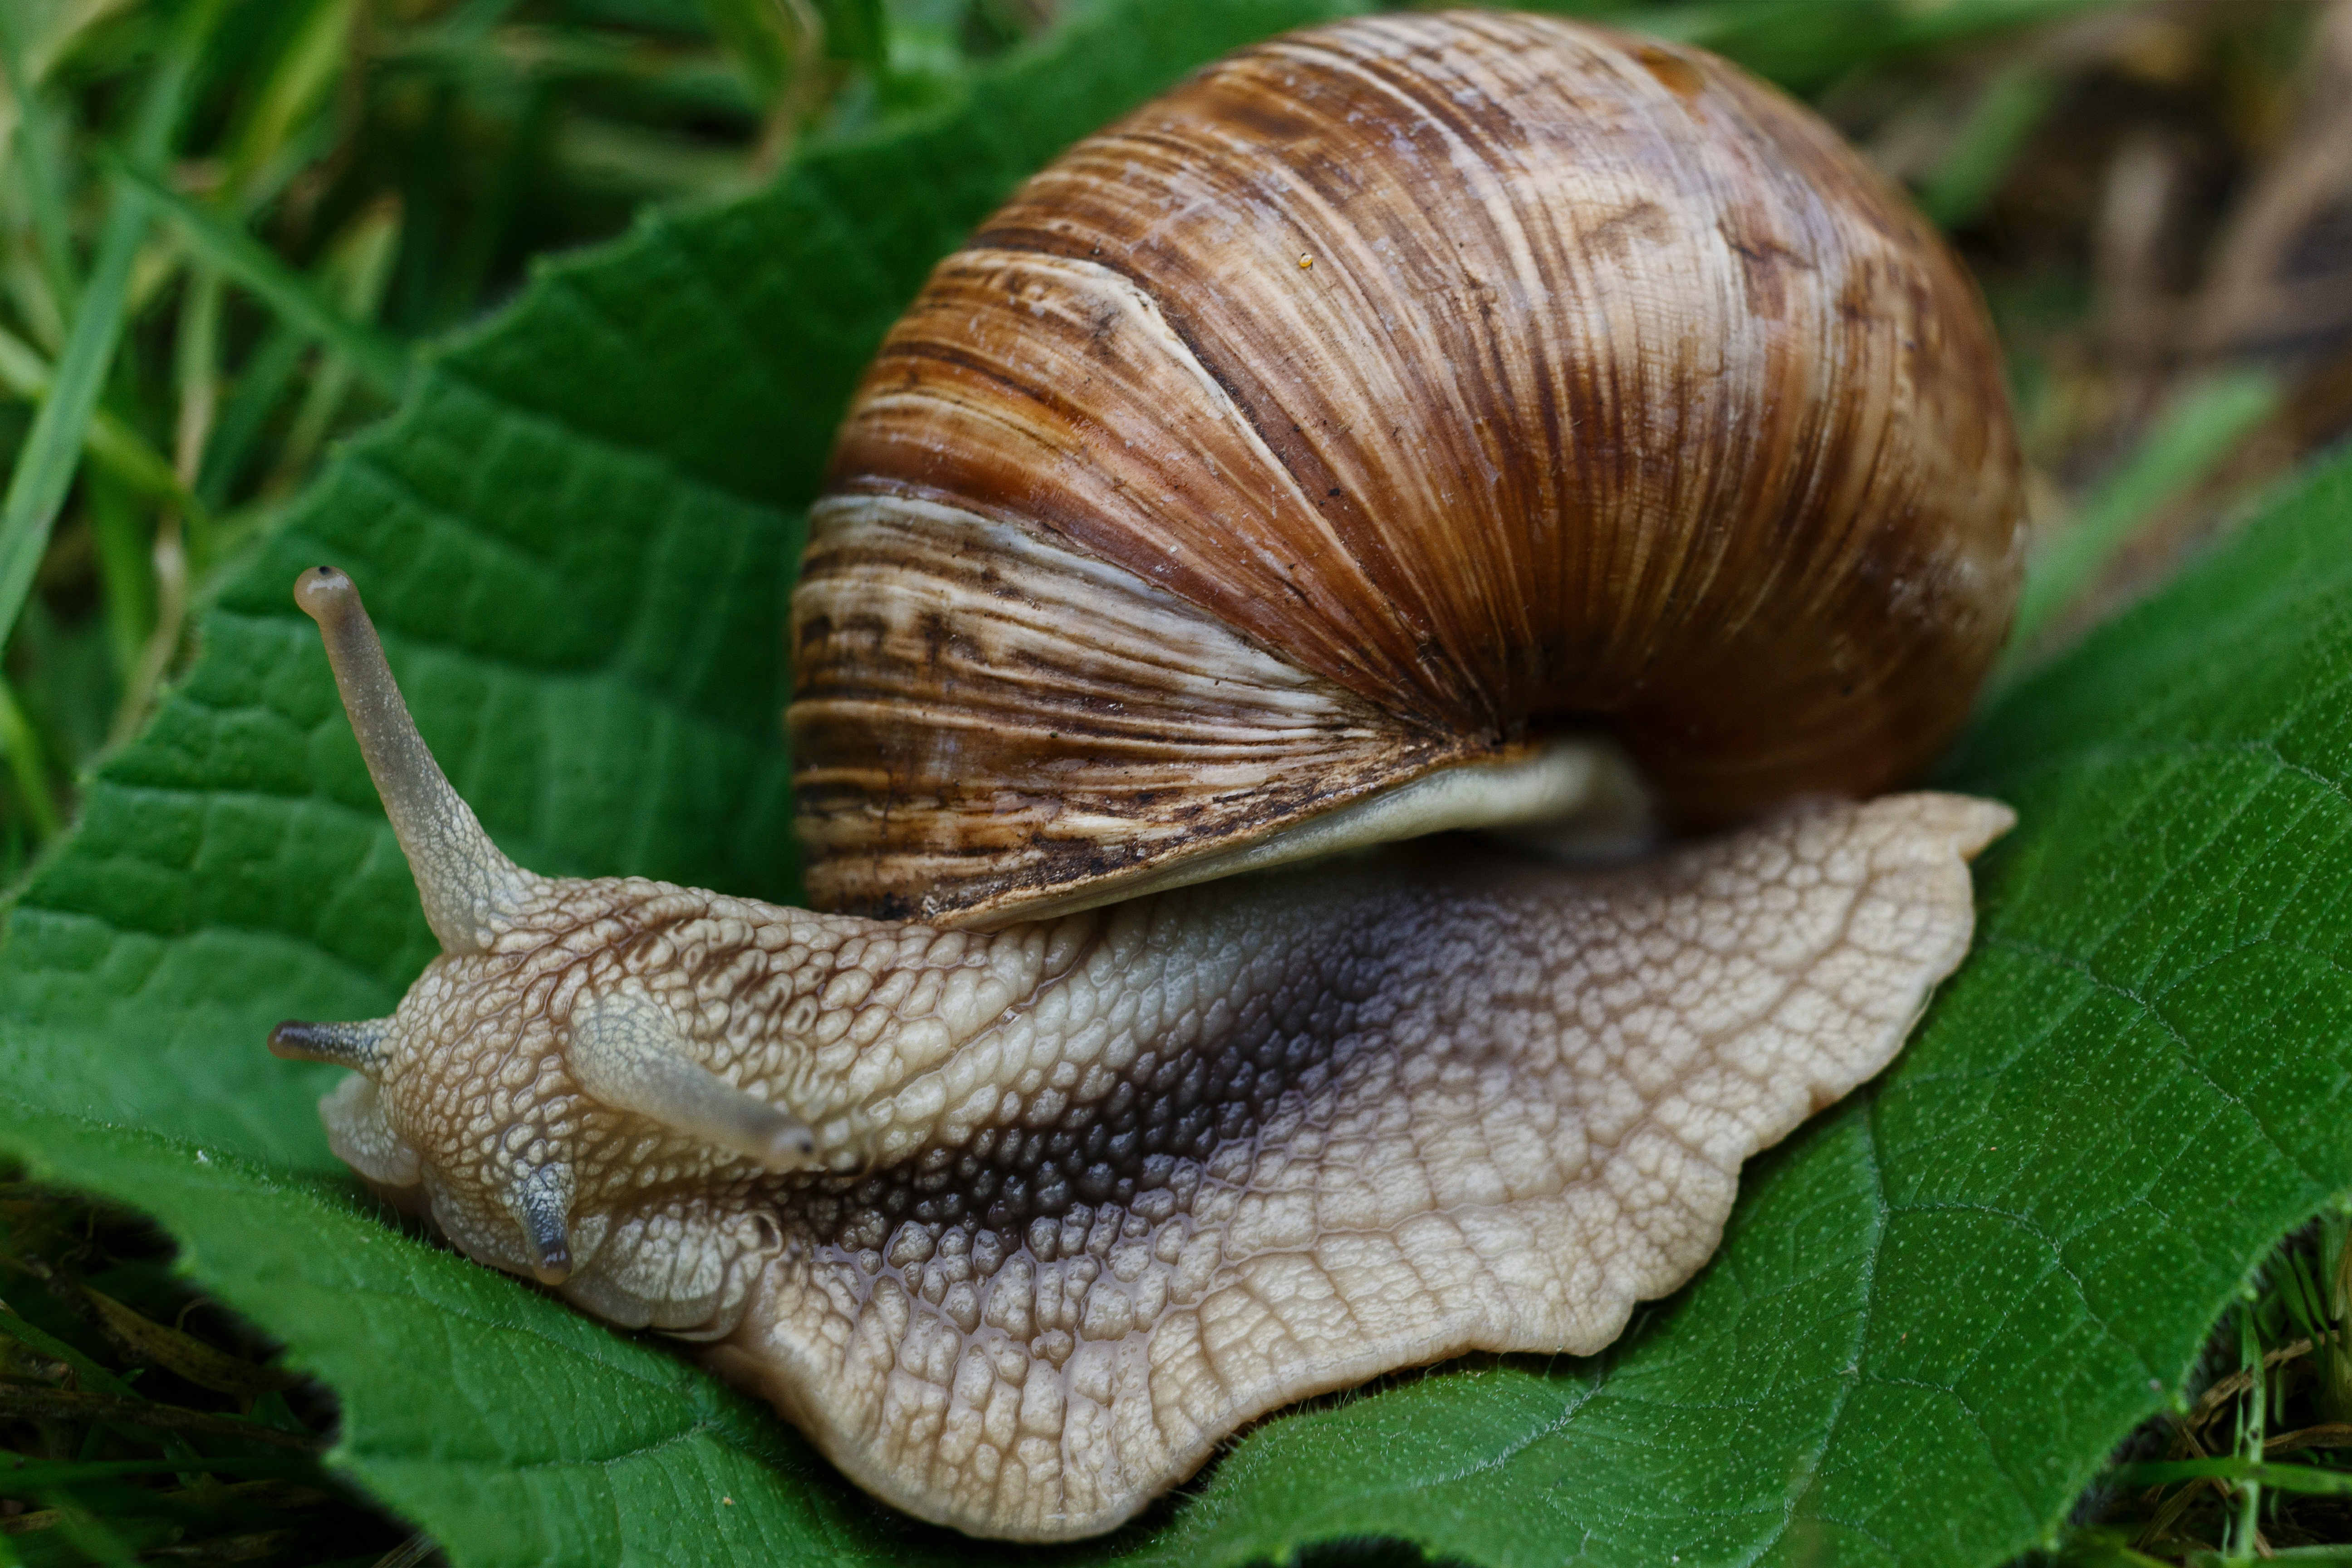 145330 Screensavers and Wallpapers Carapace for phone. Download macro, snail, carapace, shell, slugs pictures for free